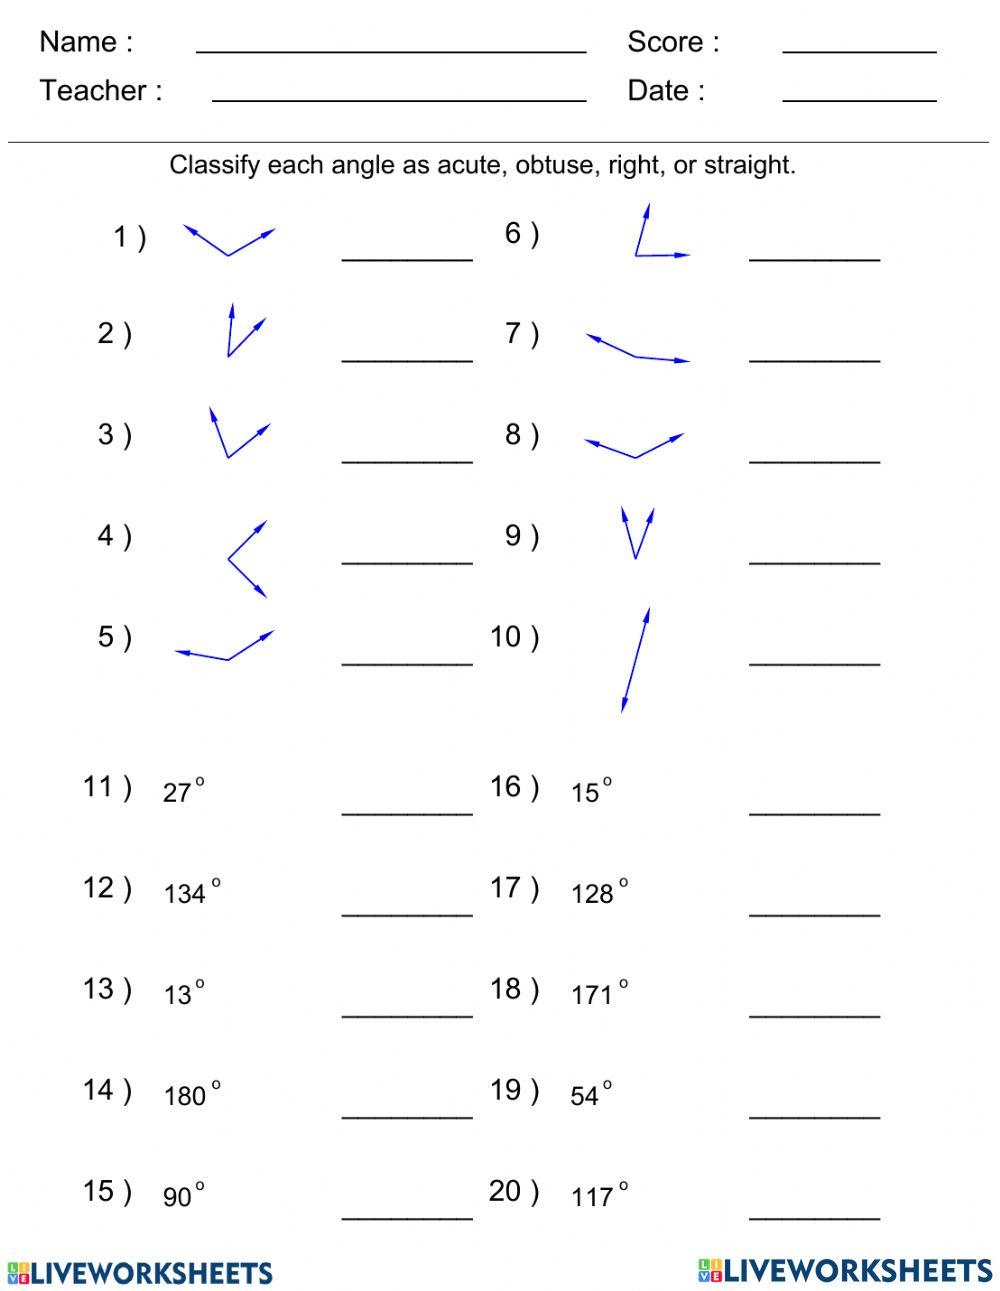 Classifying angles 2